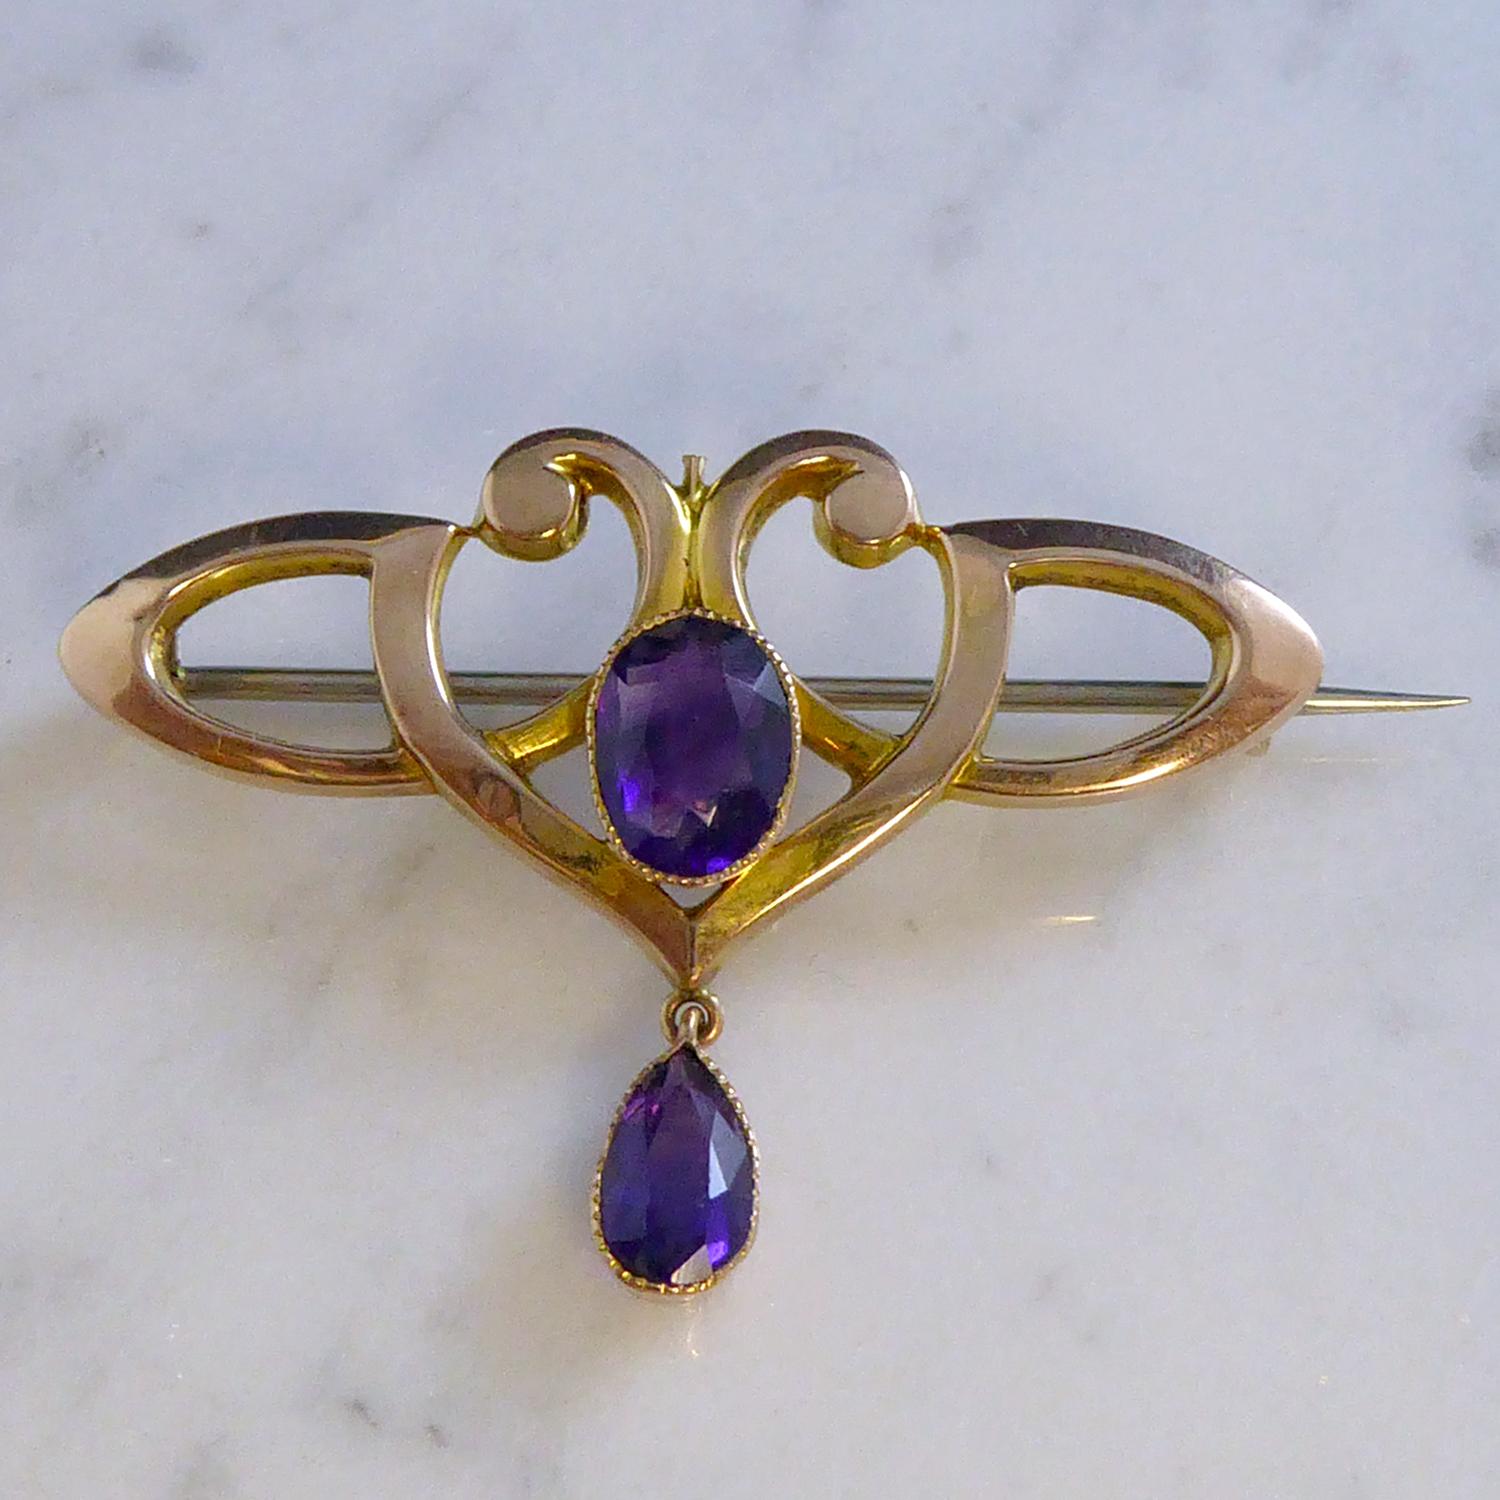 A antique brooch from the Art Nouveau era and dating from the early 1900s.  An oval mixed cut amethyst of dark purple colour is set in a milled grain edge collar mount to the centre of an ornate, open scroll rose gold design.  Suspended from the